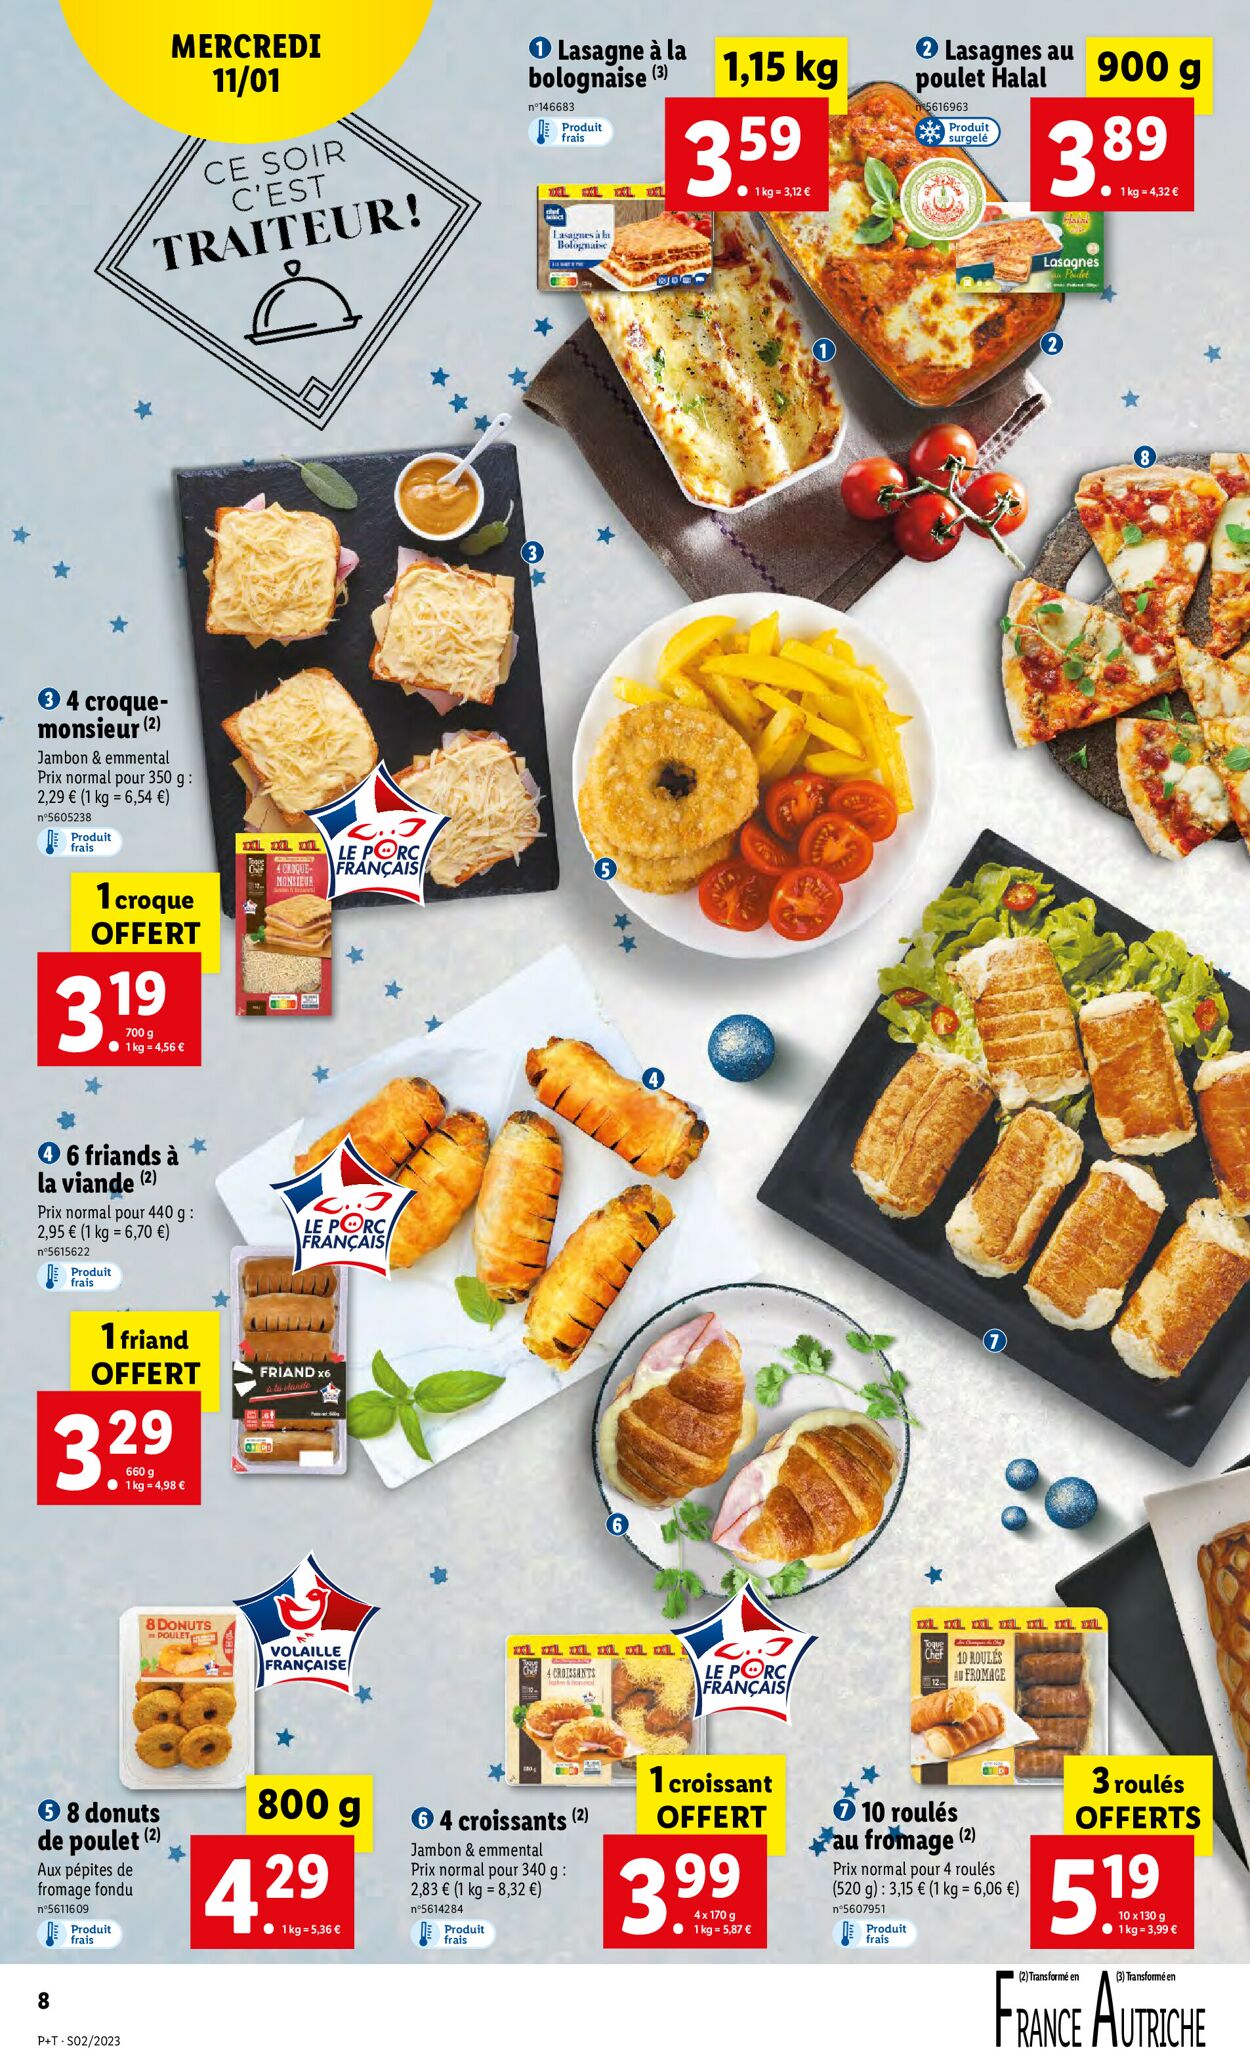 Lidl Catalogue - 11.01-17.01.2023 (Page 8)